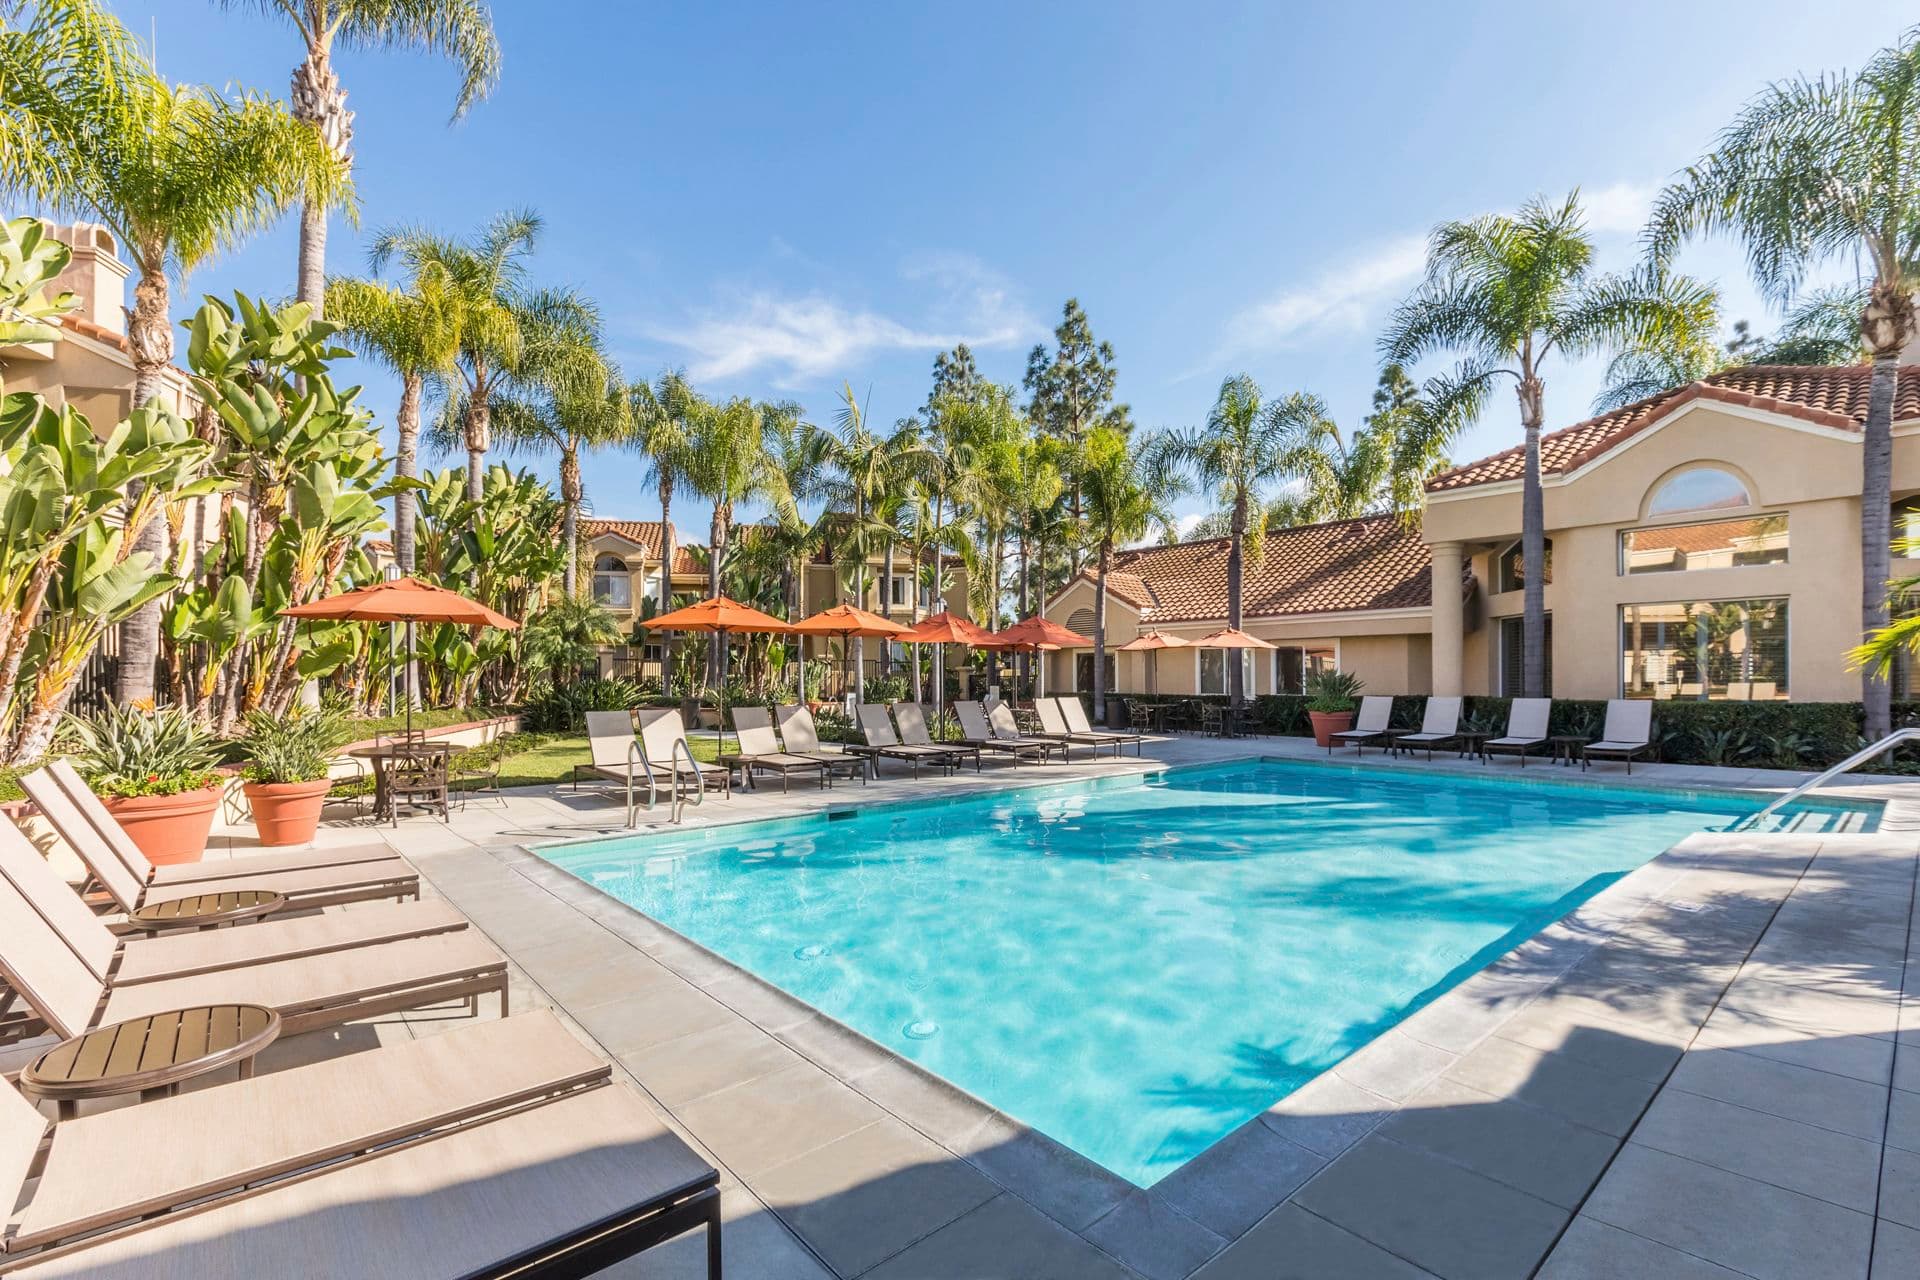 Exterior view of the pool at San Marco Villa Apartment Homes in Irvine, CA.